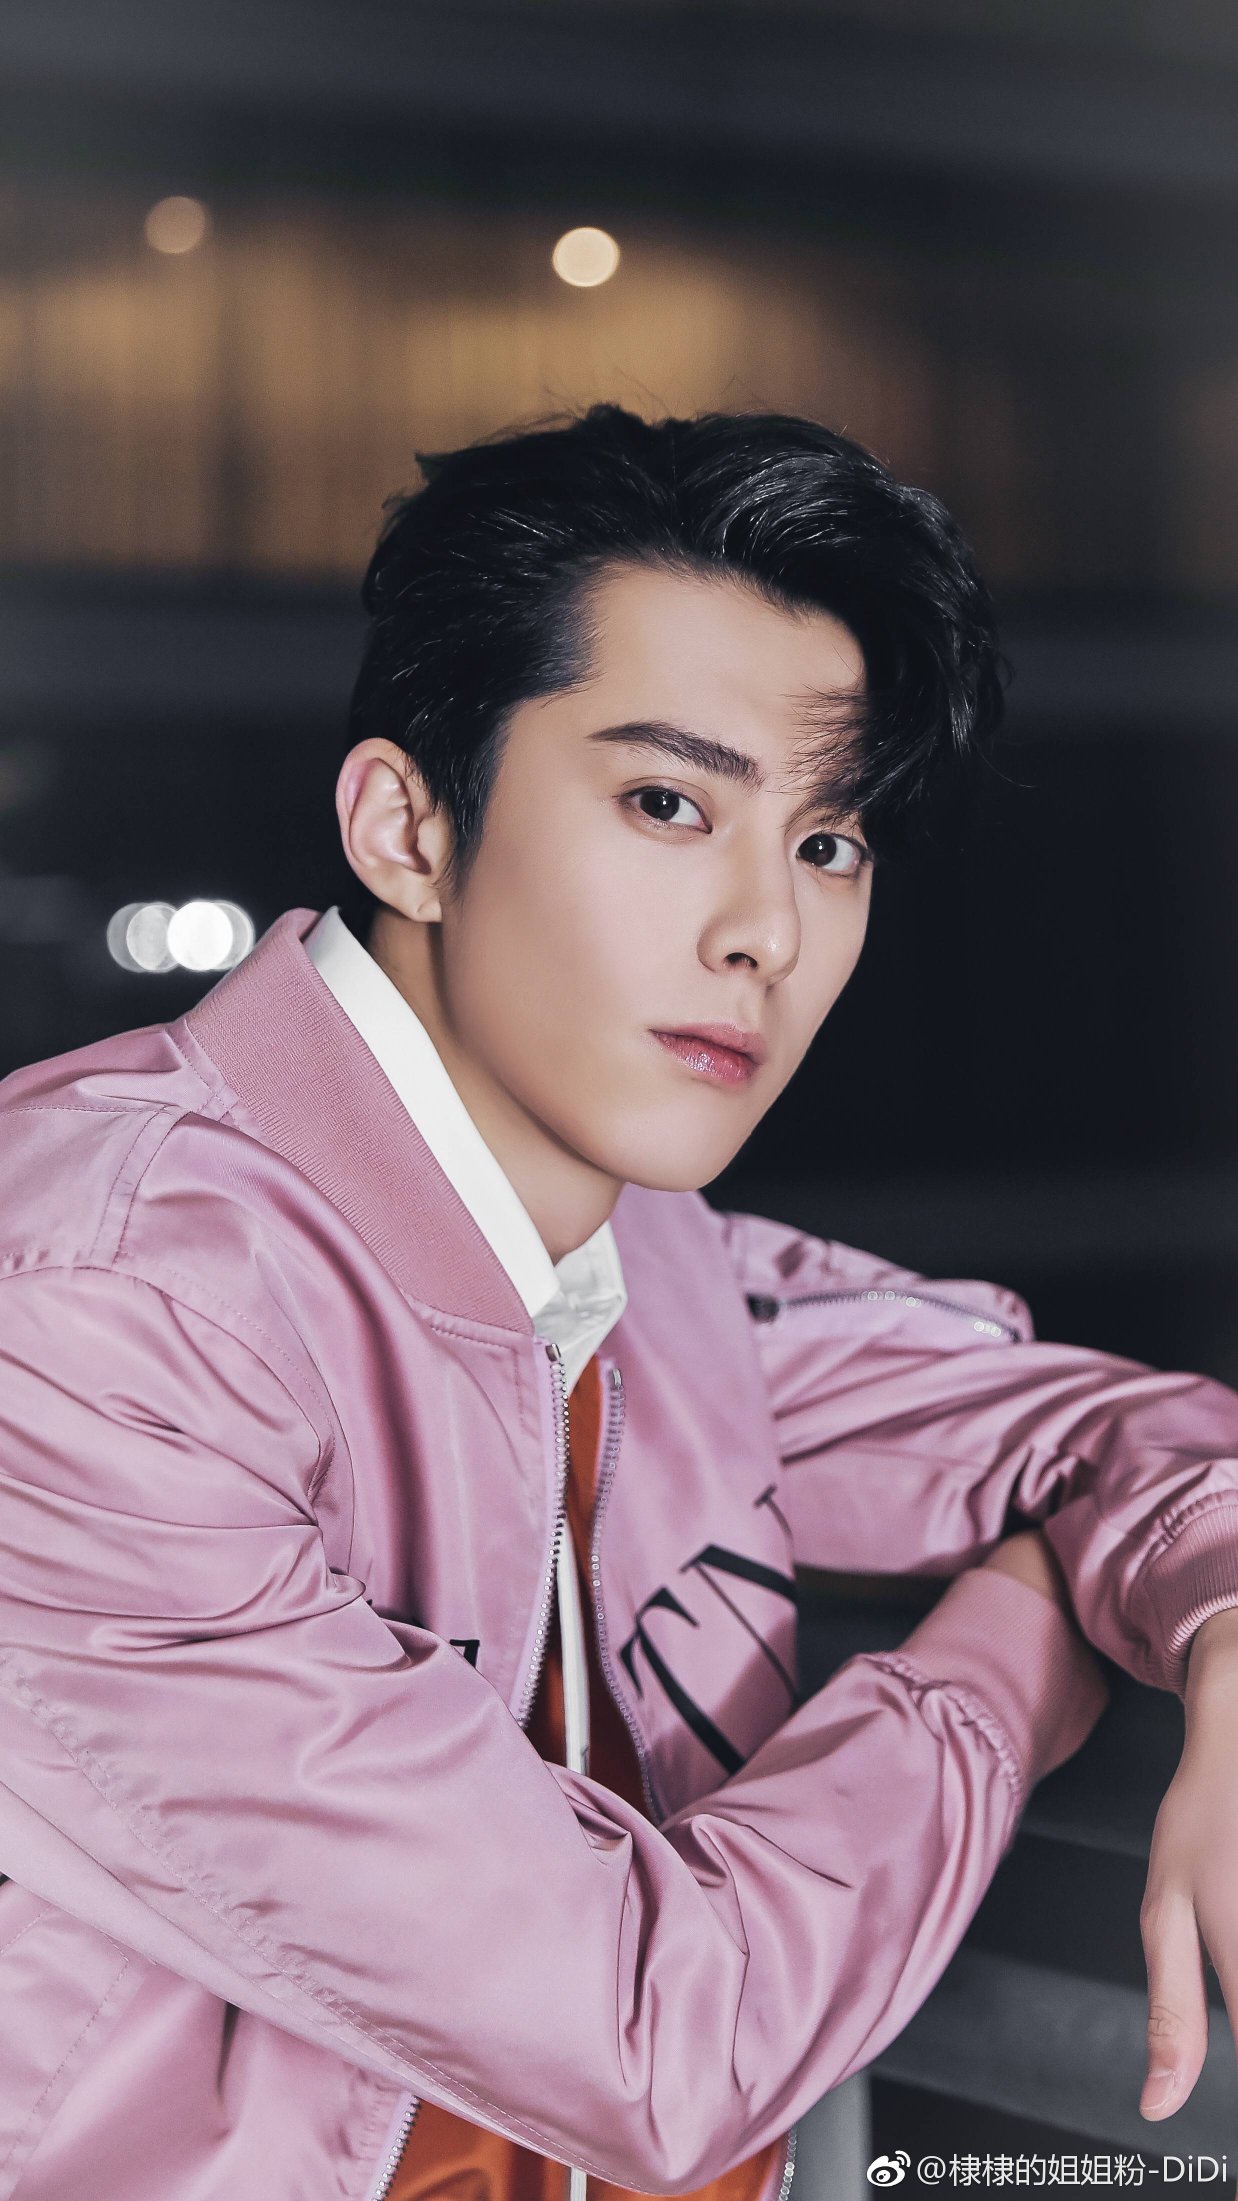 dylan wang pics on X: then now OH GOD ↬#DylanWang #王鹤棣https